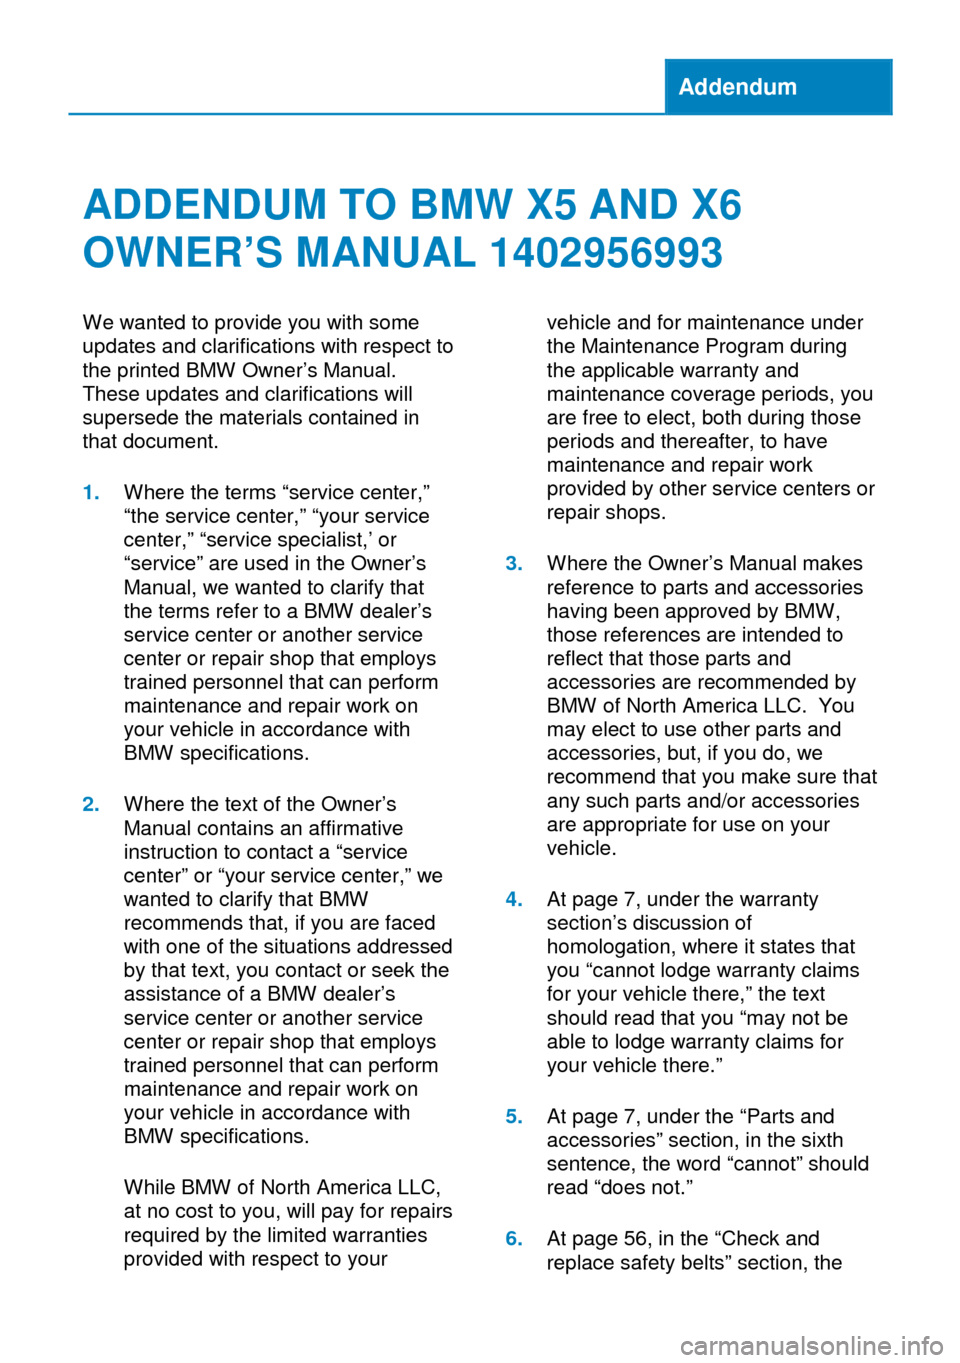 BMW X6M 2014 F86 Owners Manual Addendum
ADDENDUM TO BMW X5 AND X6
OWNER’S MANUAL 1402956993
We wanted to provide you with some
updates and clarifications with respect to
the printed BMW Owner’s Manual.
These updates and clarifi